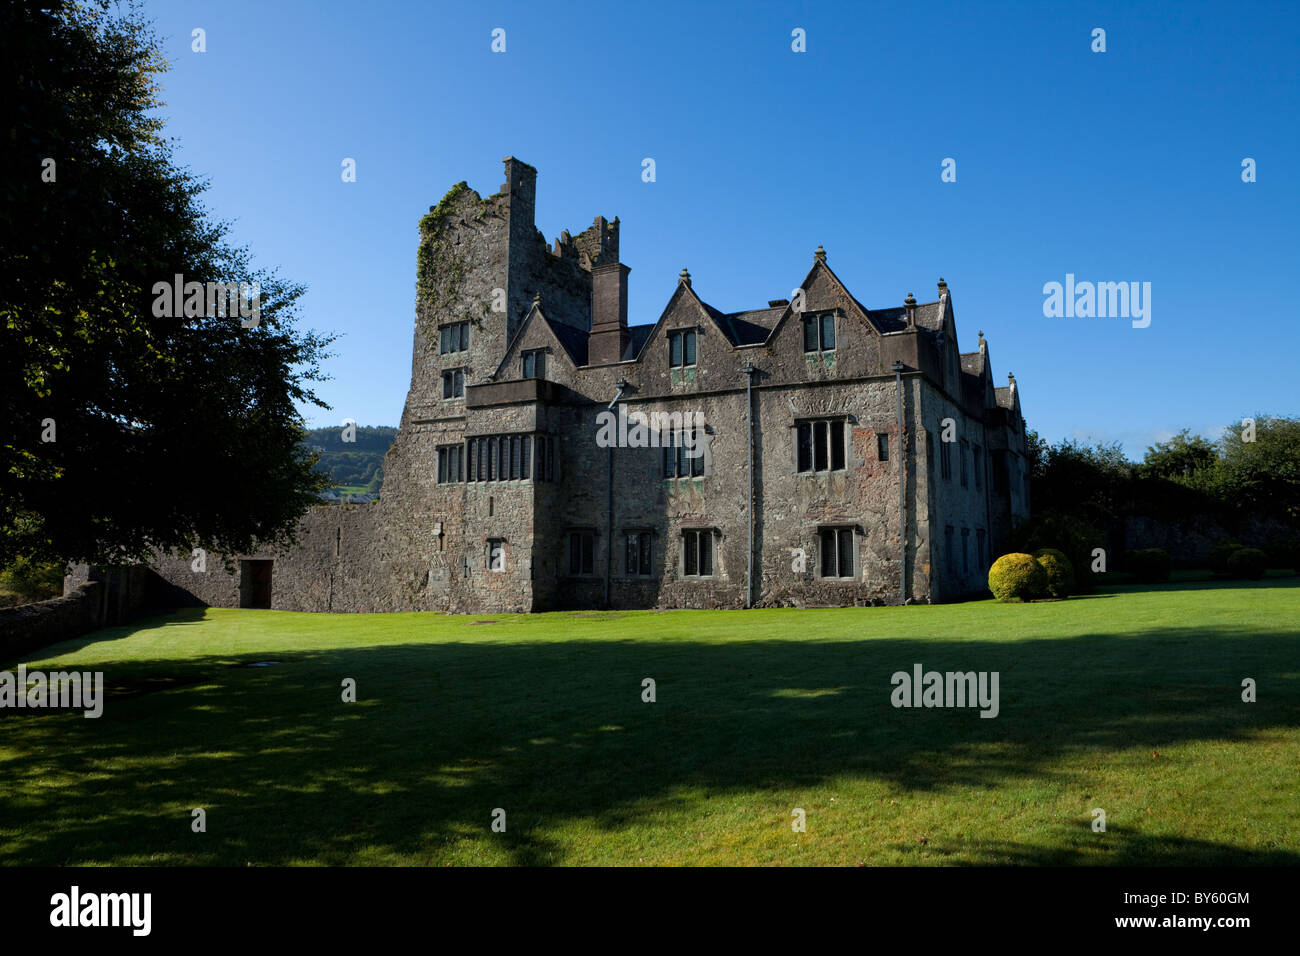 The Elizabethan Manor House built by the 10th Earl of Ormonde in the 16th Century on the River Suir, Carrick-on-Suir, County Tipperary, Ireland Stock Photo